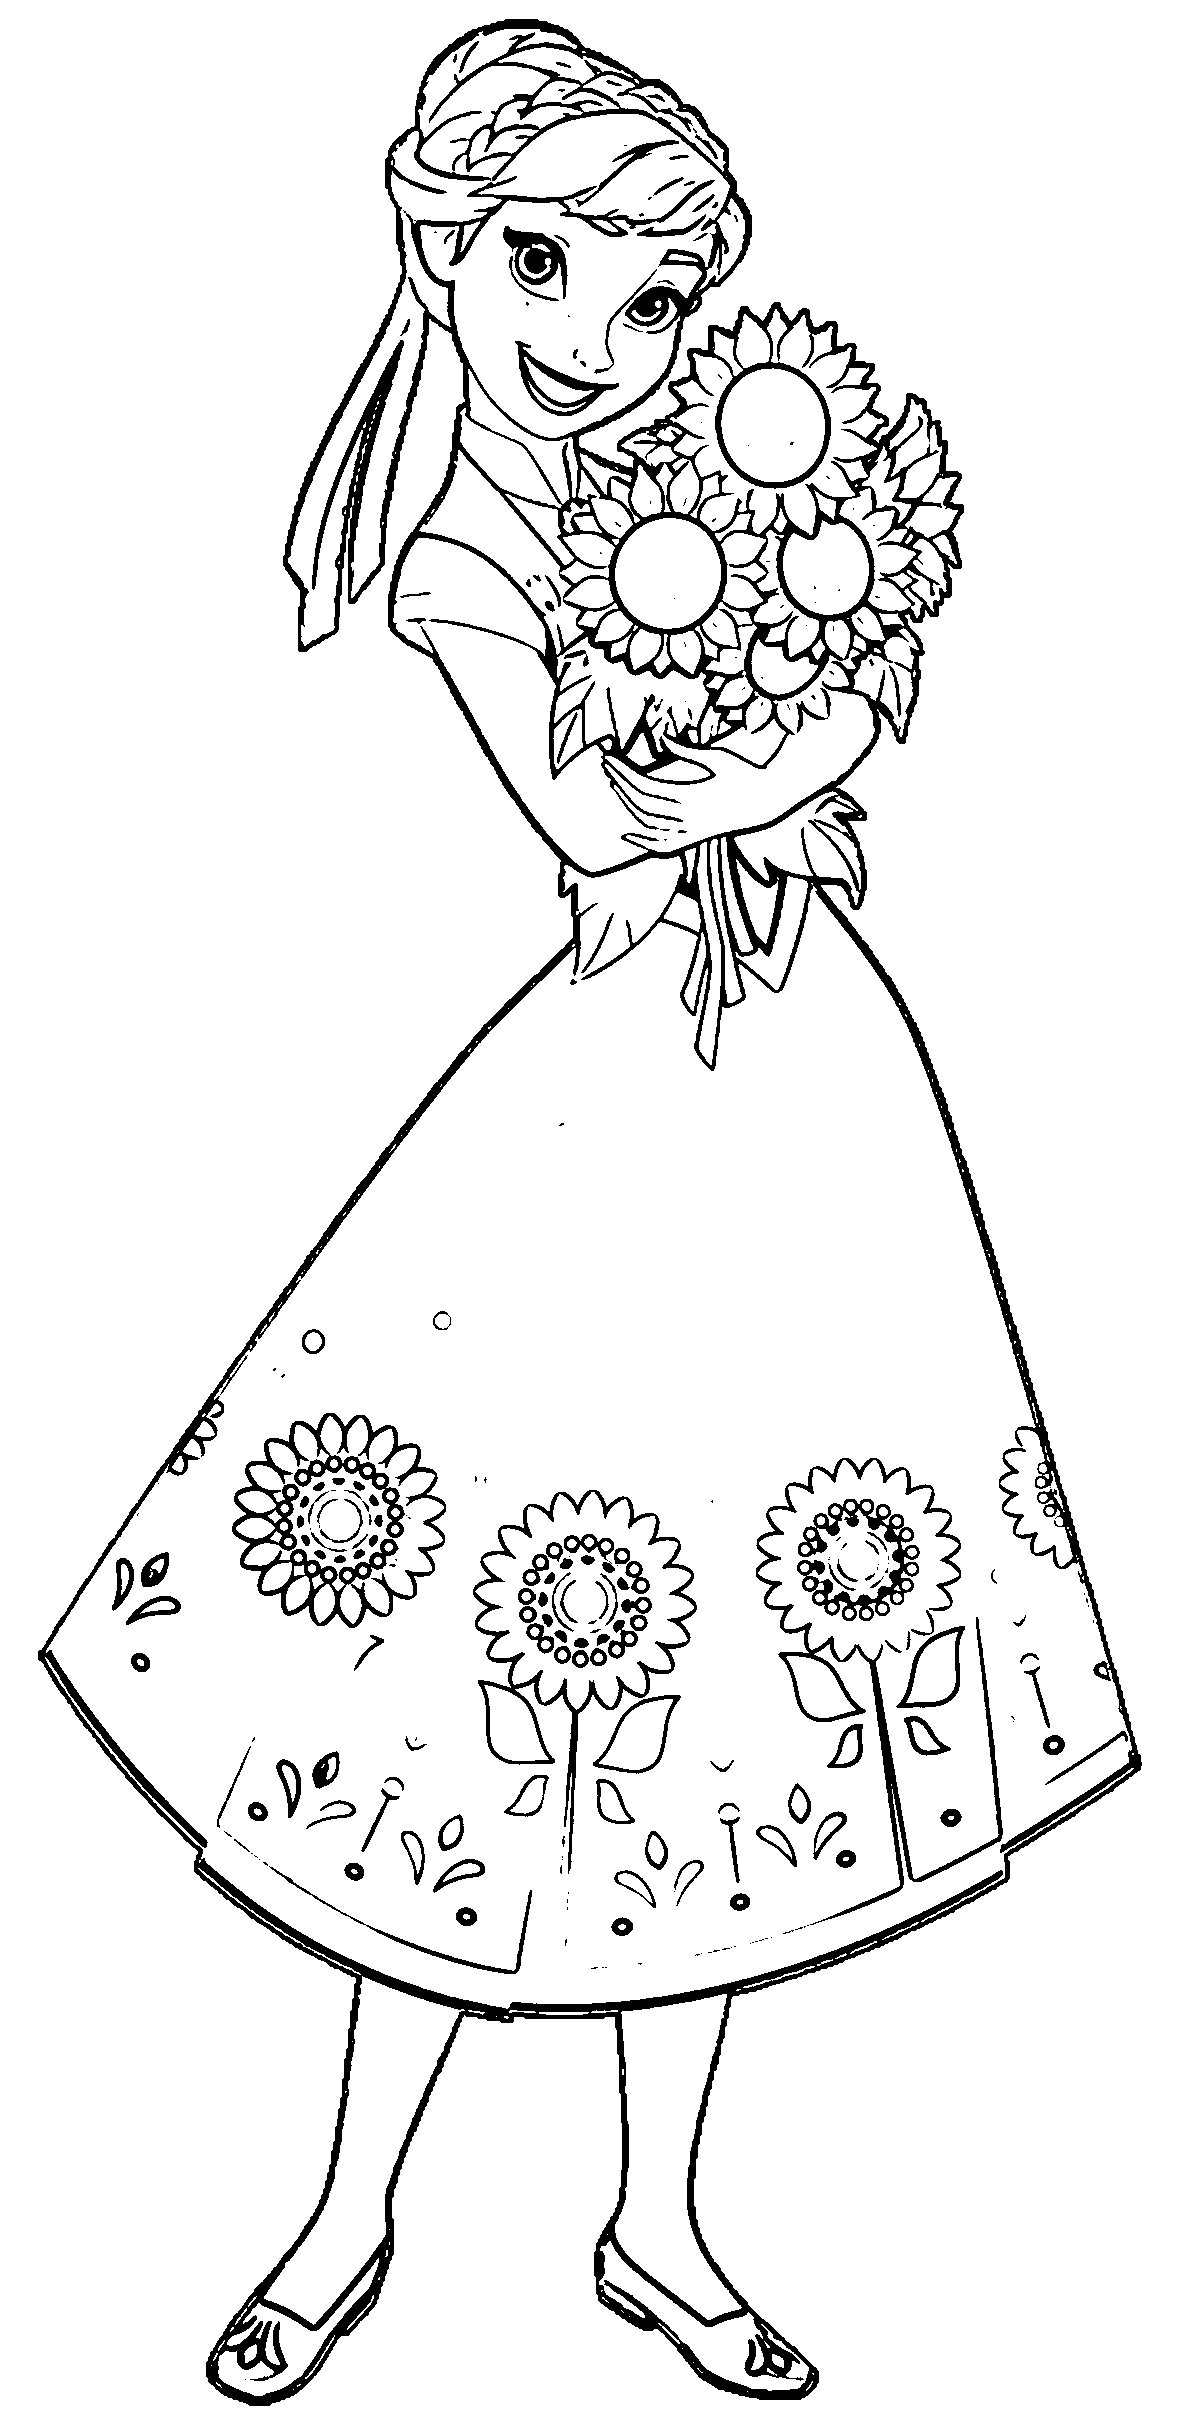 Elsa And Anna Hugging Coloring Page Free Printable Coloring Pages for